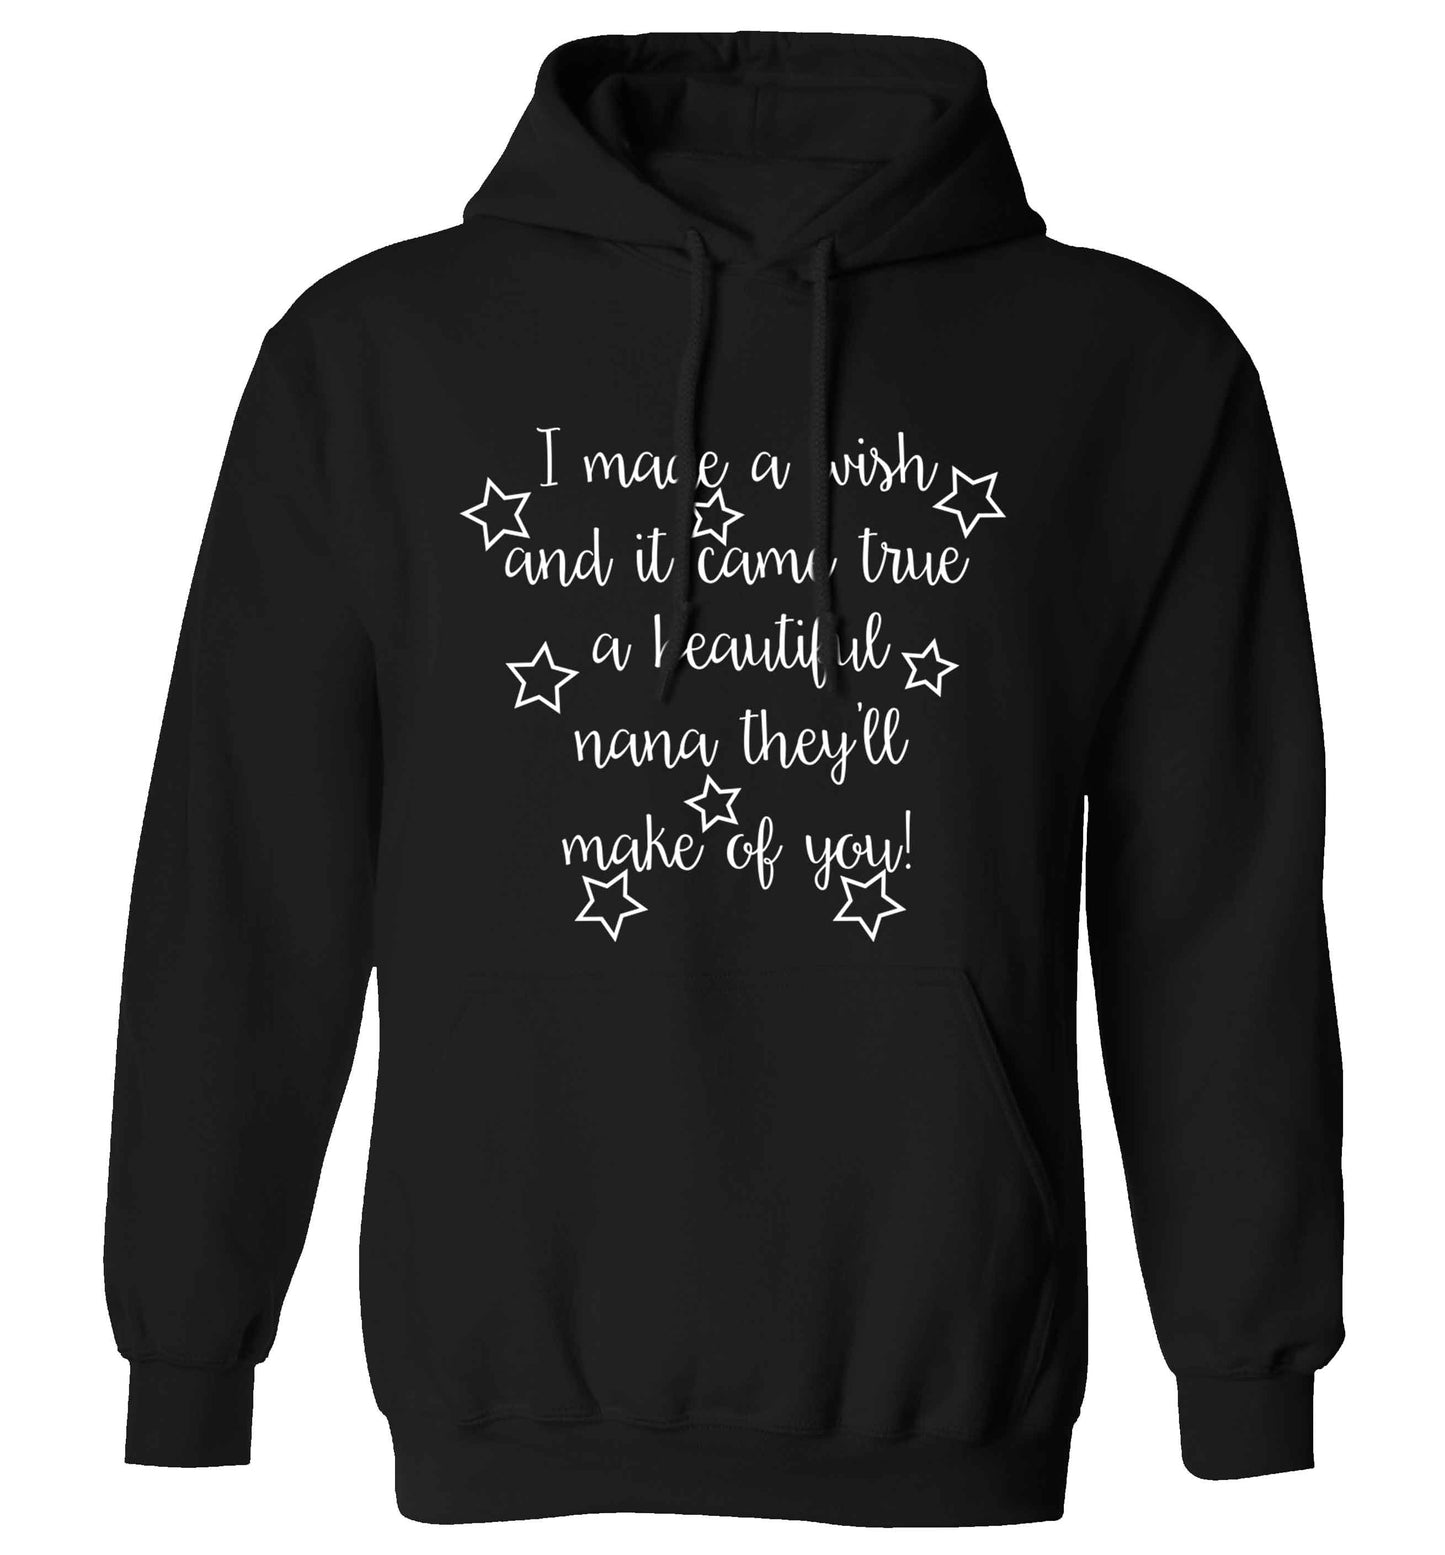 I made a wish and it came true a beautiful nana they'll make of you! adults unisex black hoodie 2XL